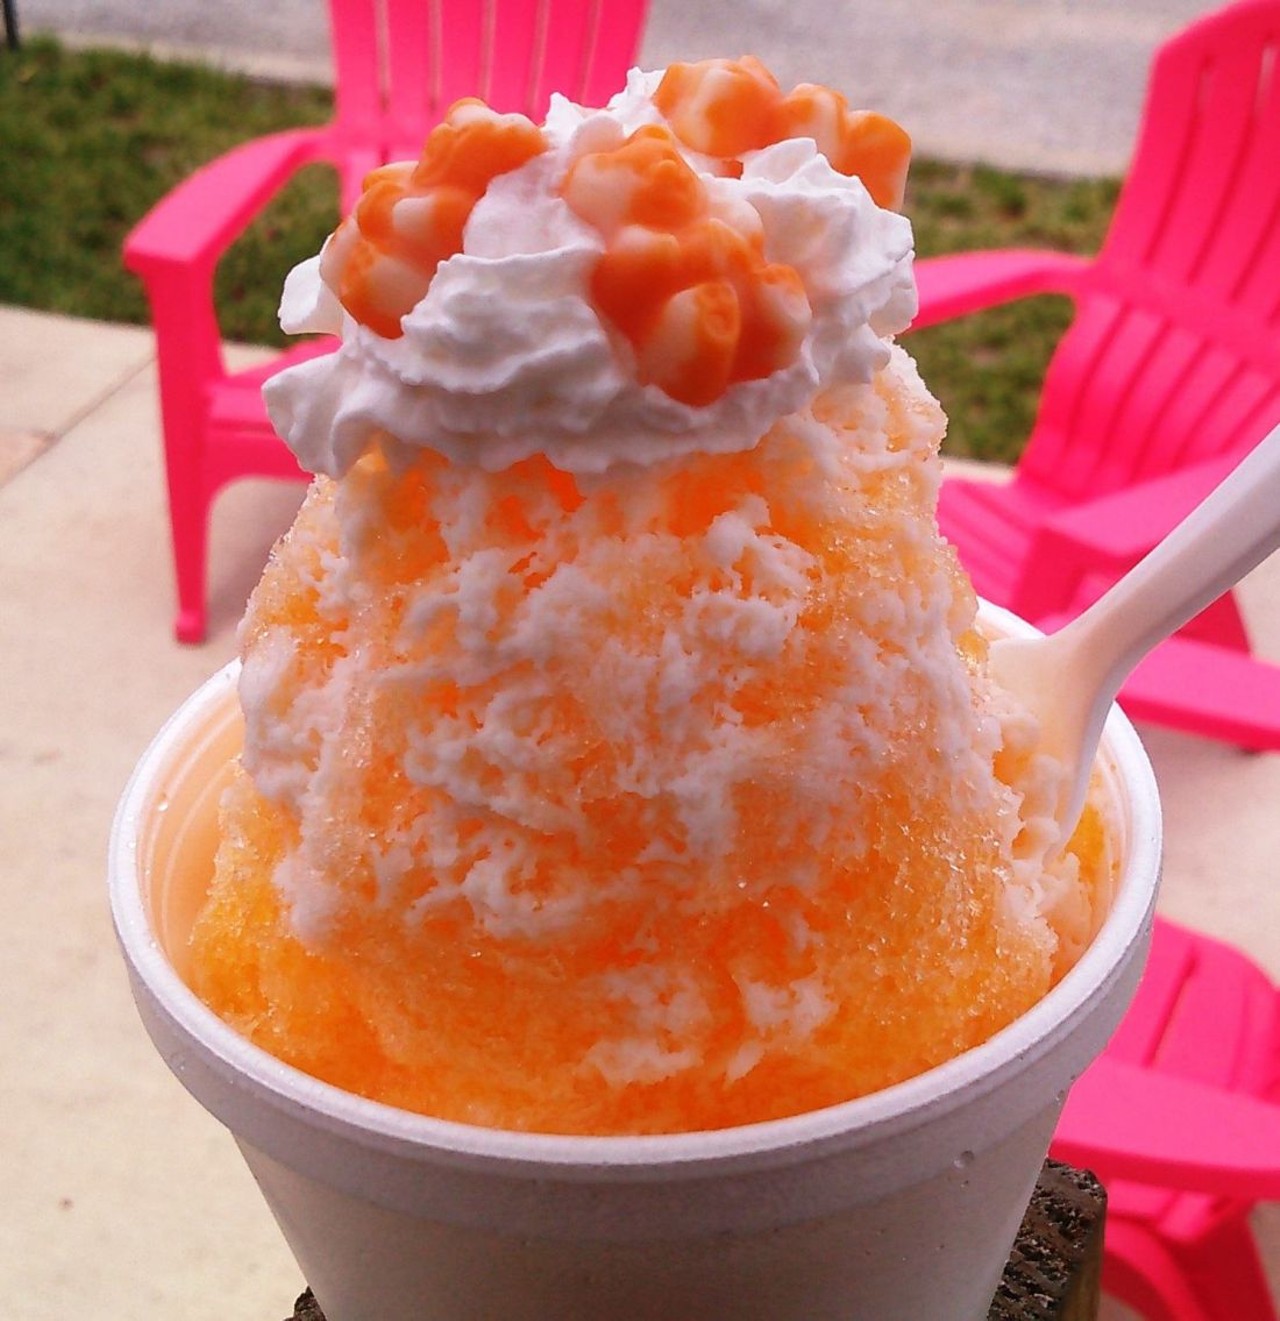  Westcott&#146;s Arctic Ice
48 W. Seminary St., 419-744-0598
Check out their original &#147;Dreamsycle,&#148; an orange shaved ice covered in sweet cream and topped with &#145;dreamsycle&#146; gummies. 
Photo via Westcott's Arctic Ice/Facebook